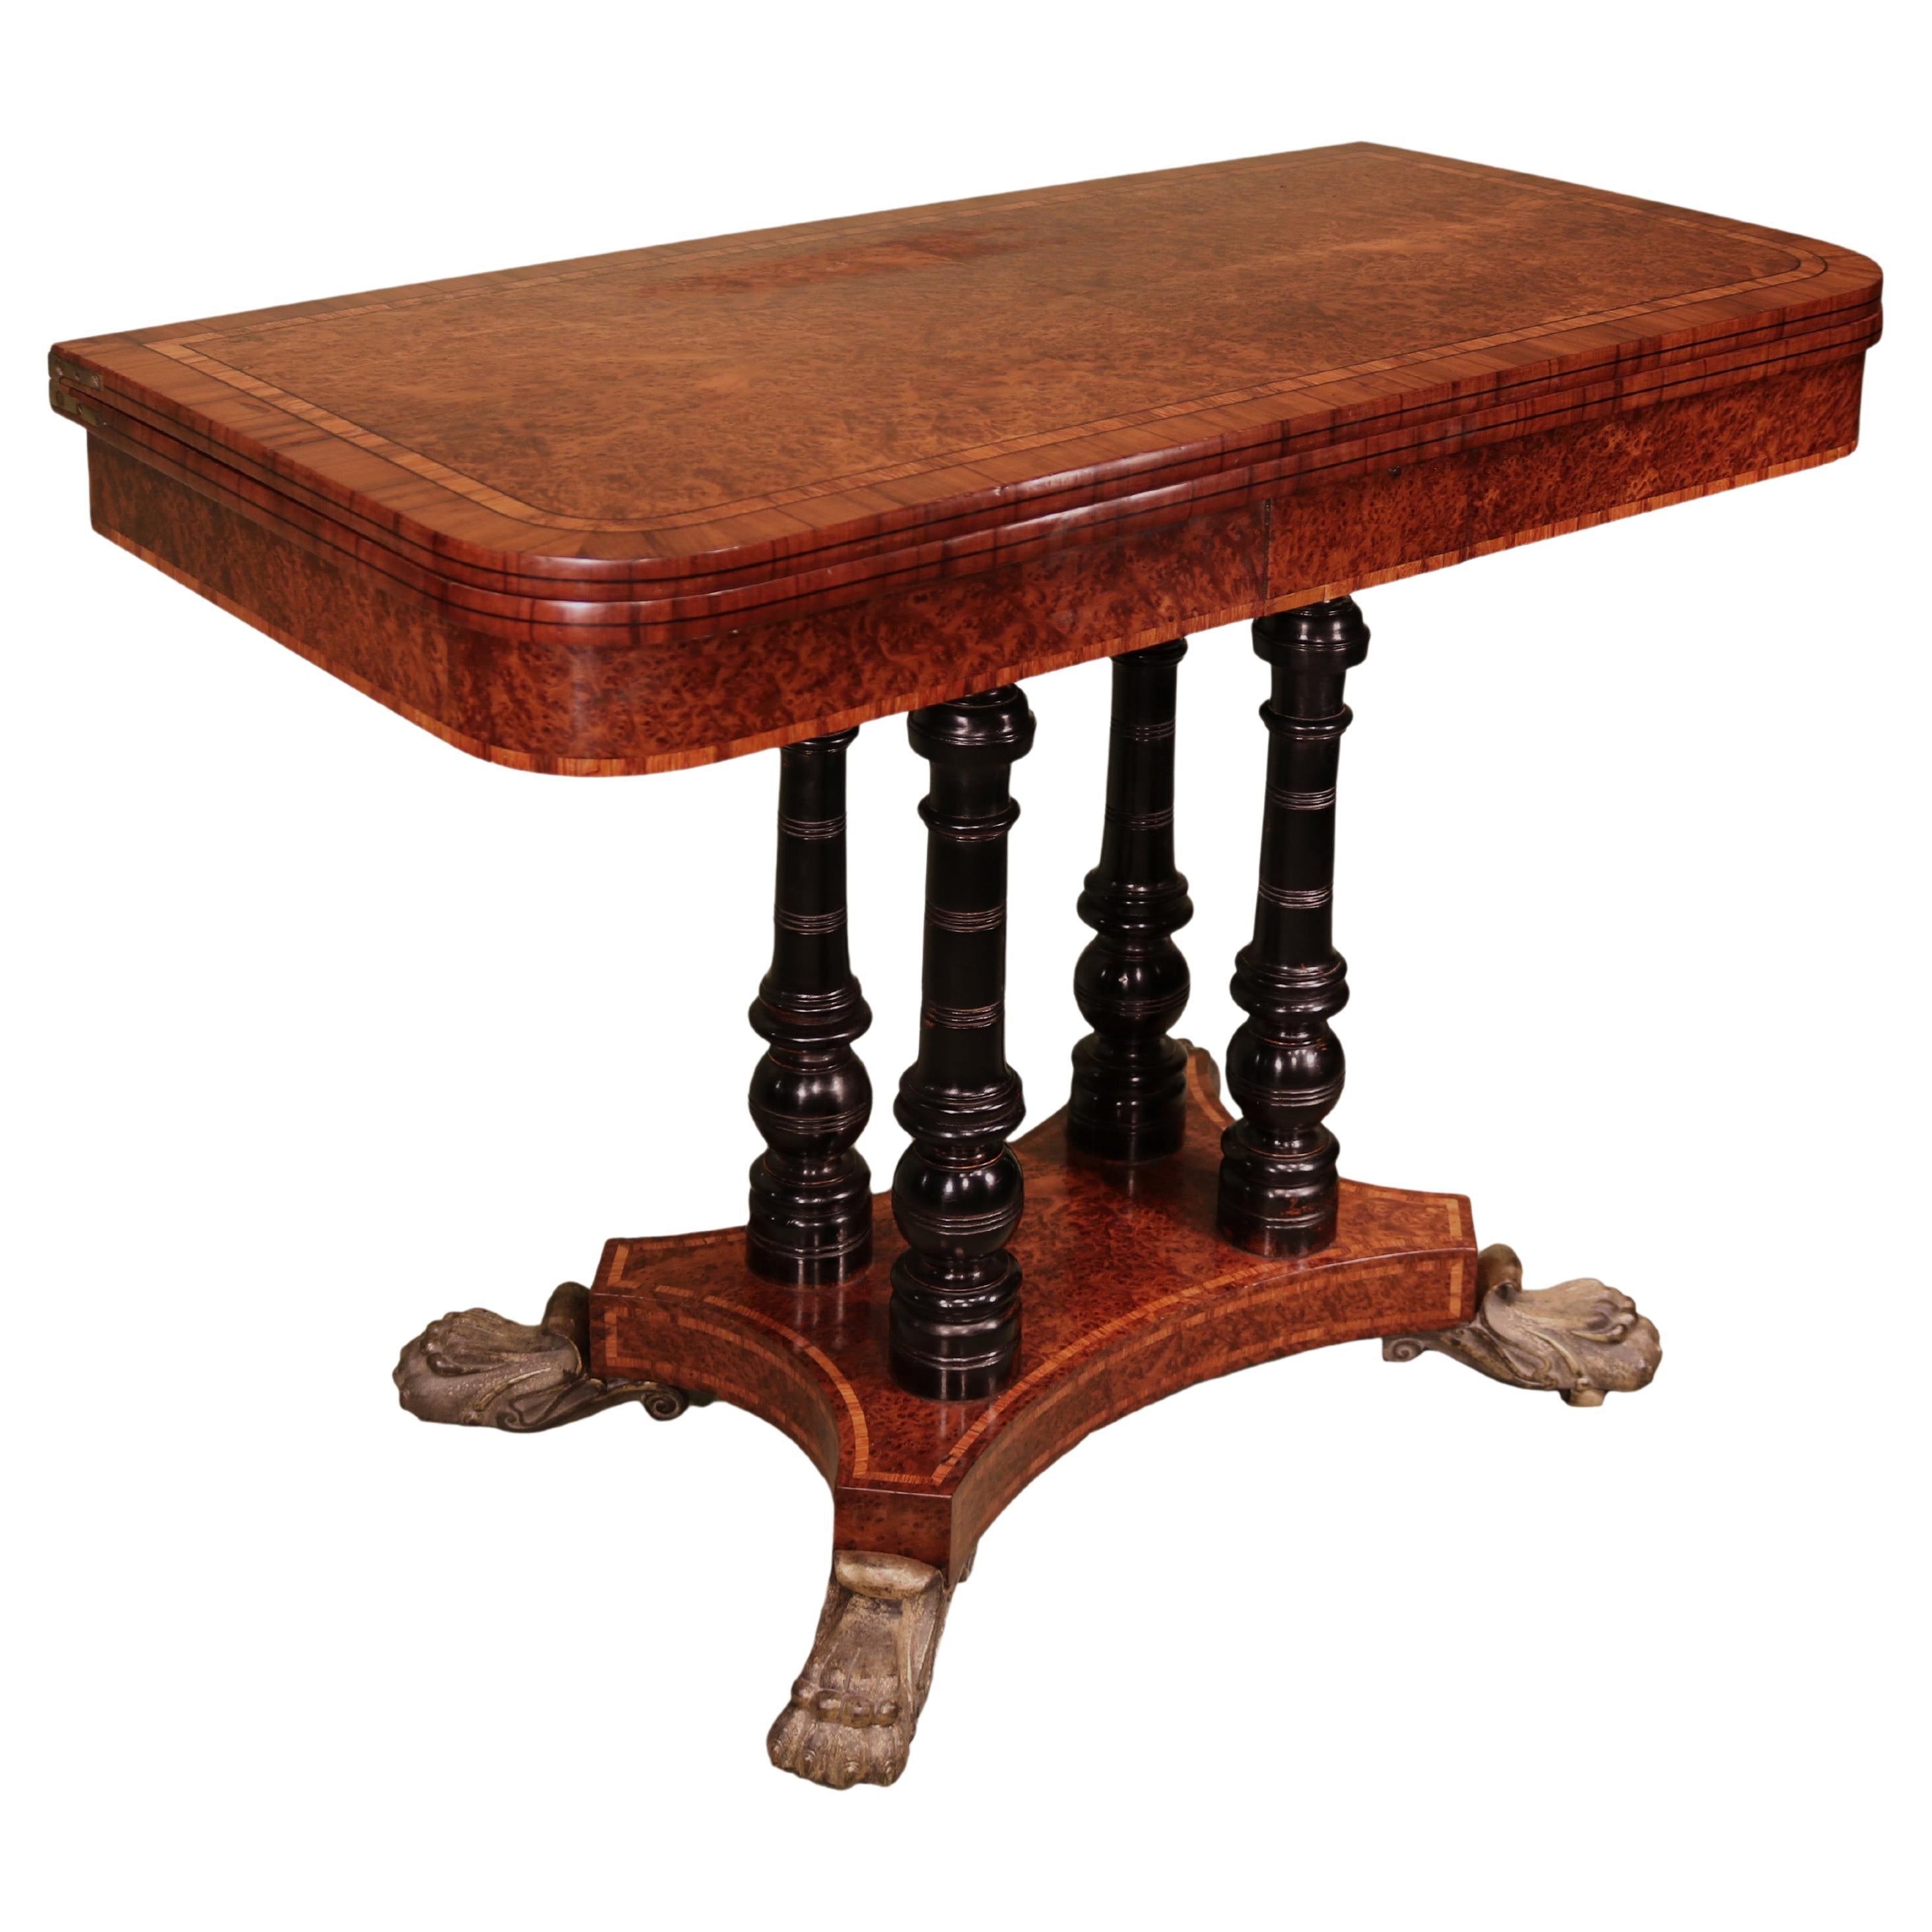 Antique Regency period burr yew wood card table